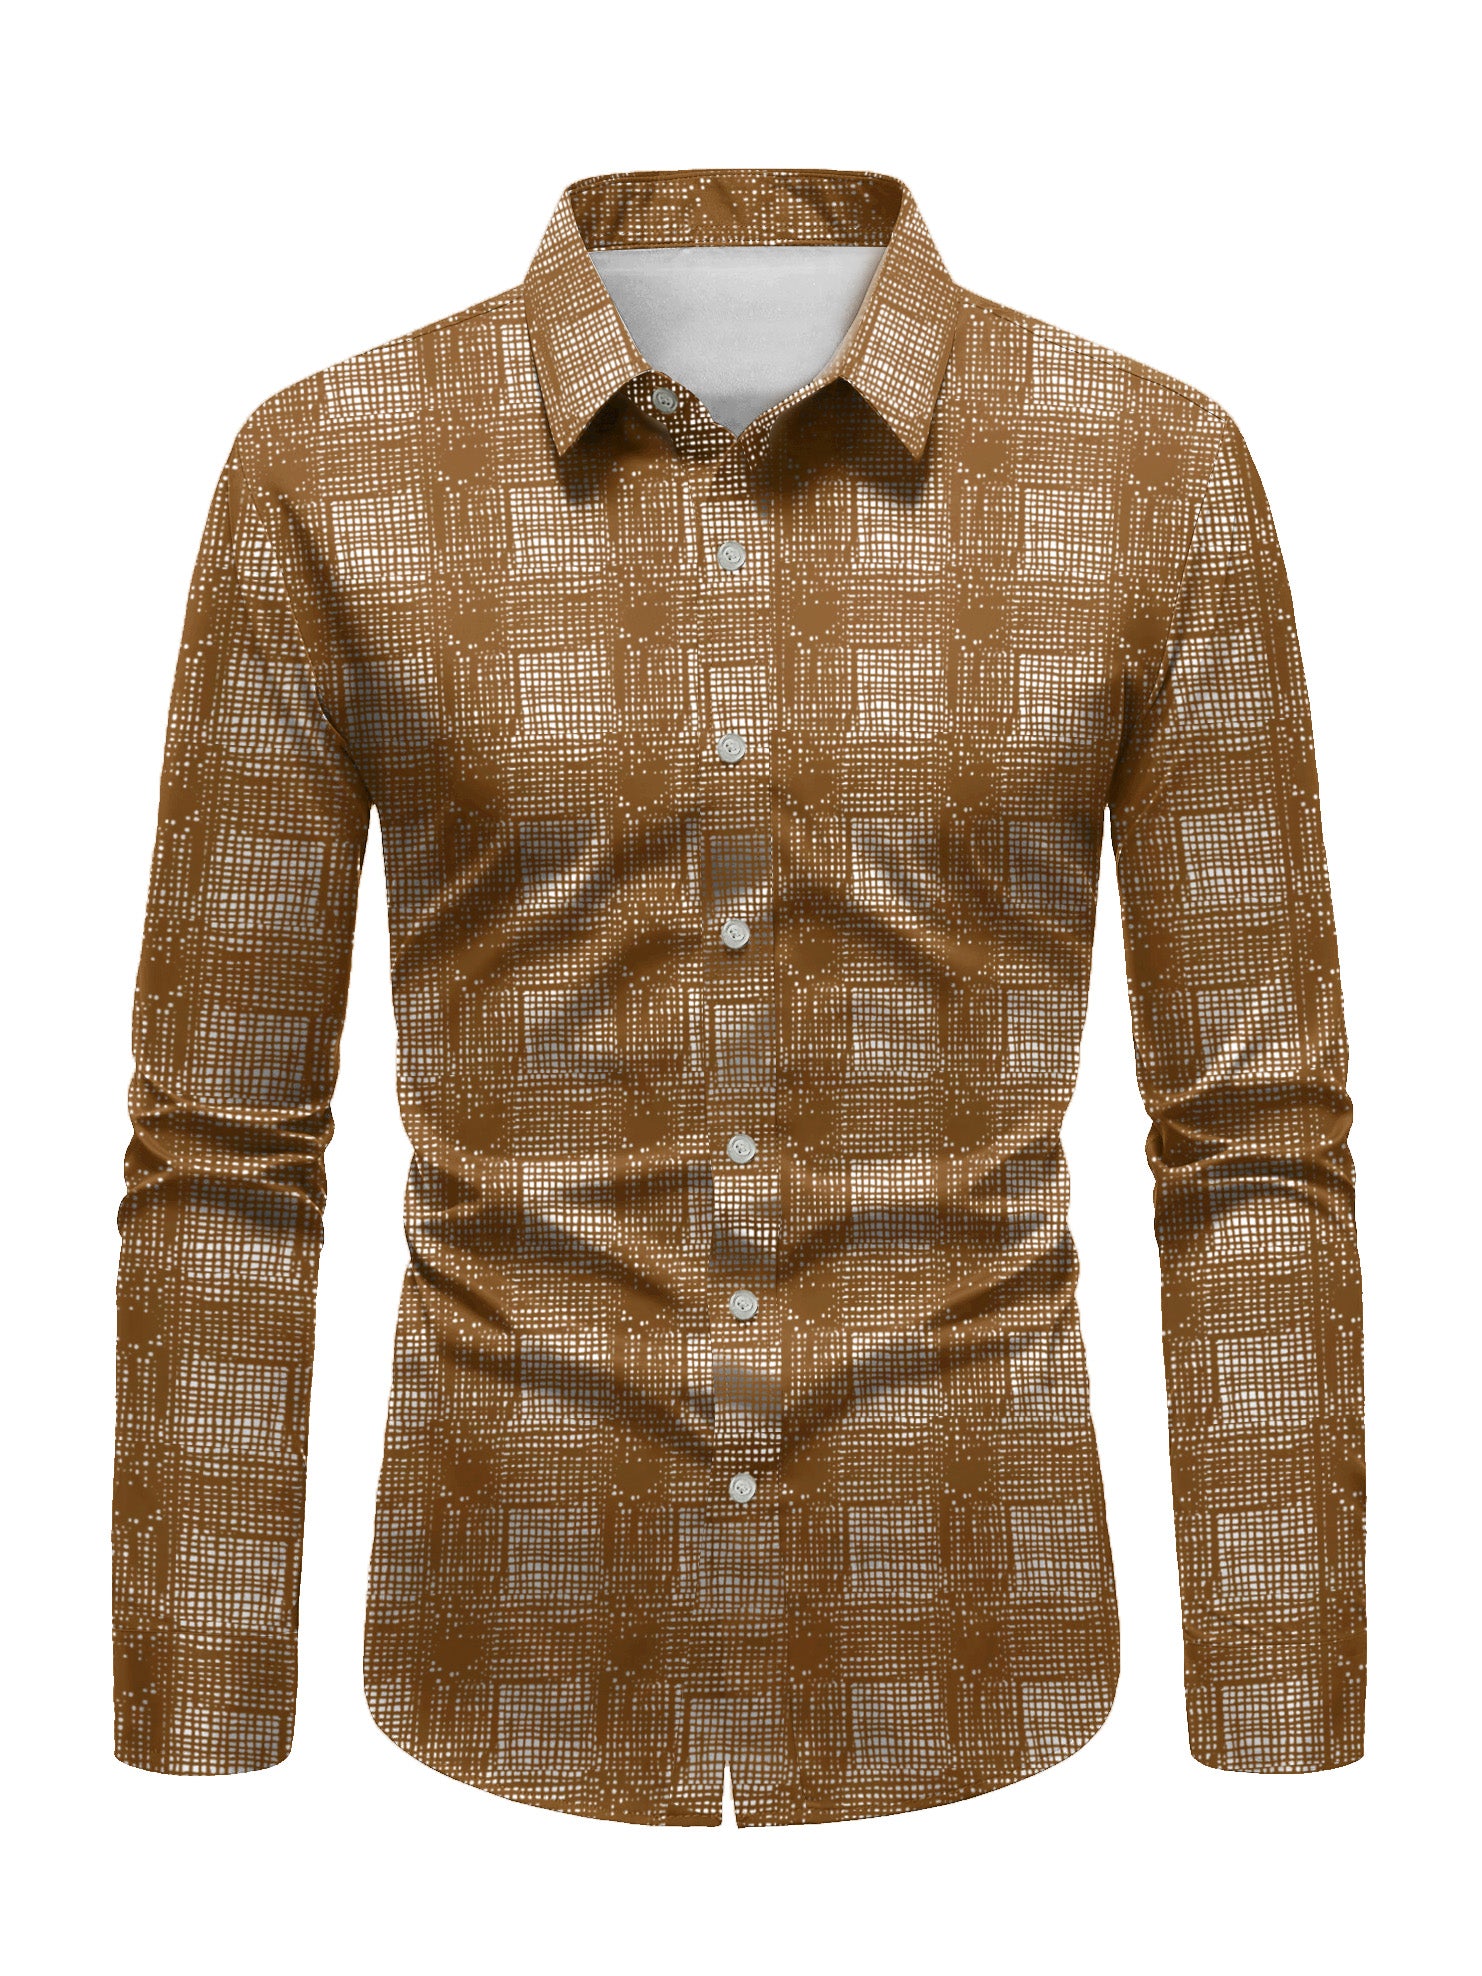 NXT Premium Slim Fit Casual Shirt For Men-Golden with Allover Check-BE919